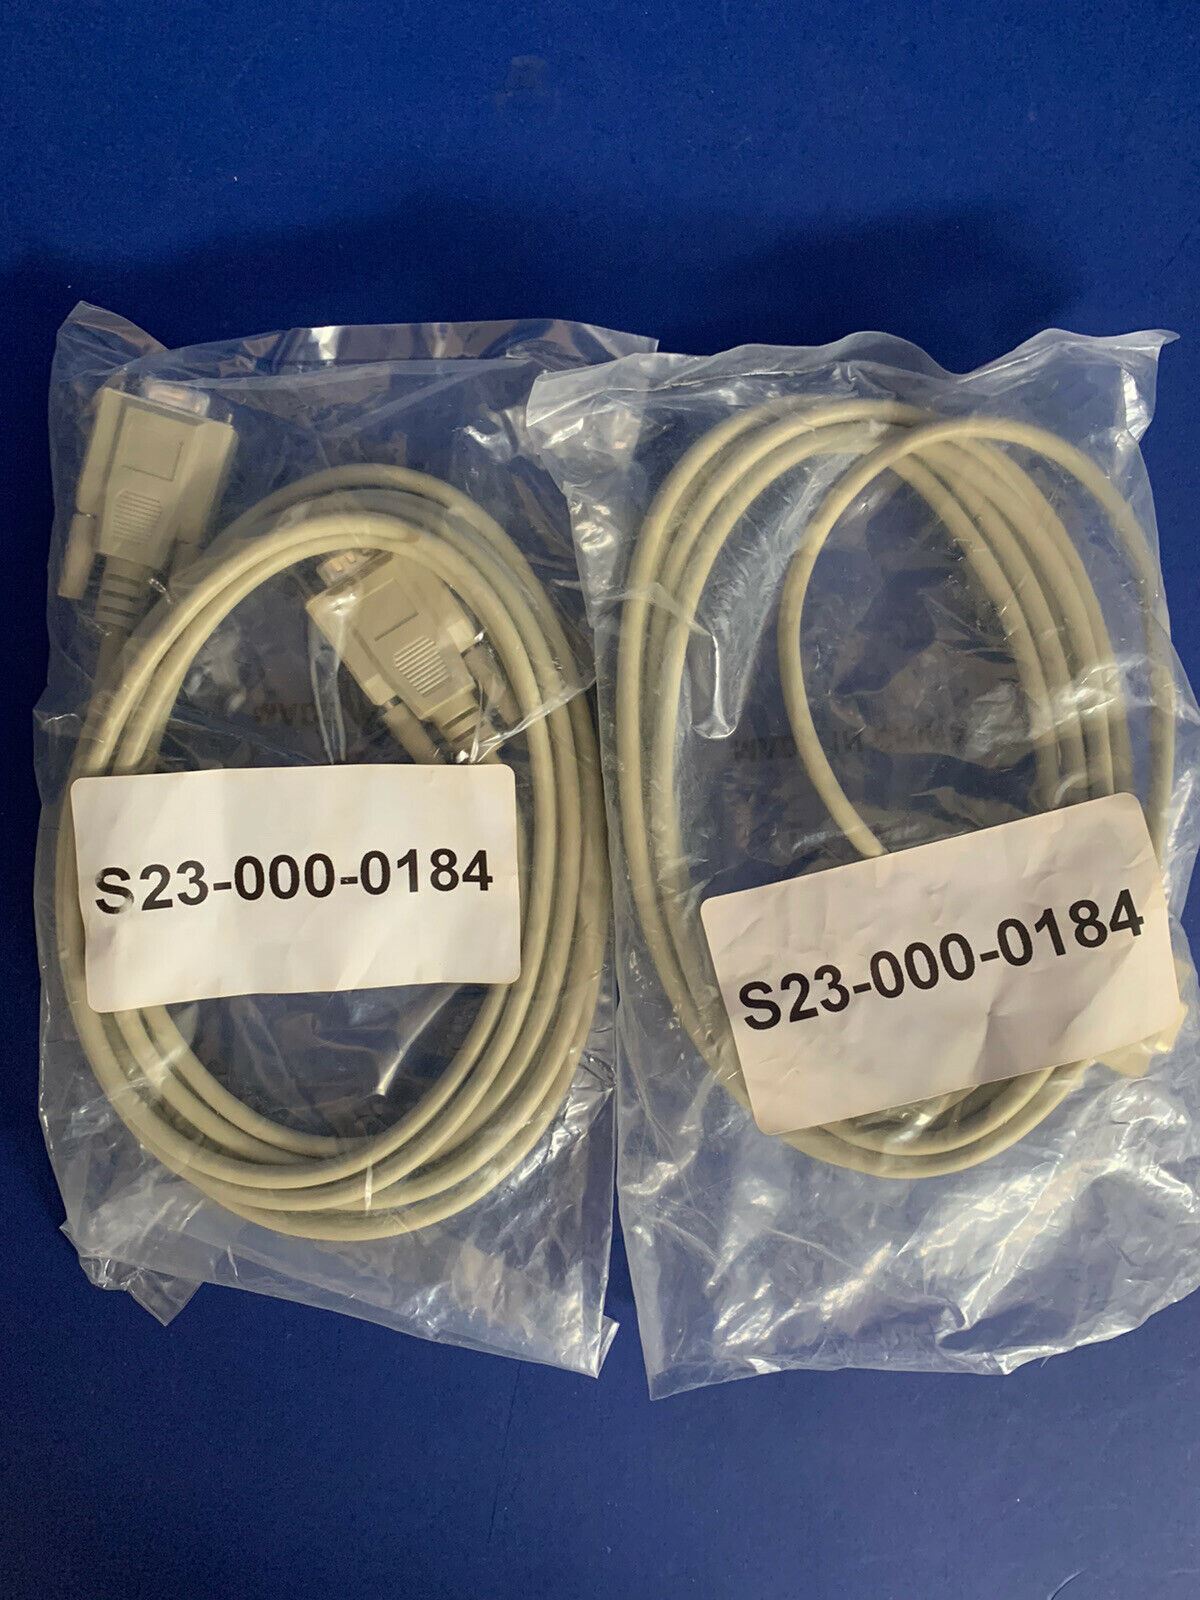 D-SUB Cable Assy with 9 Pin M/F Poly D-Sub Ports, Lot of 2 New